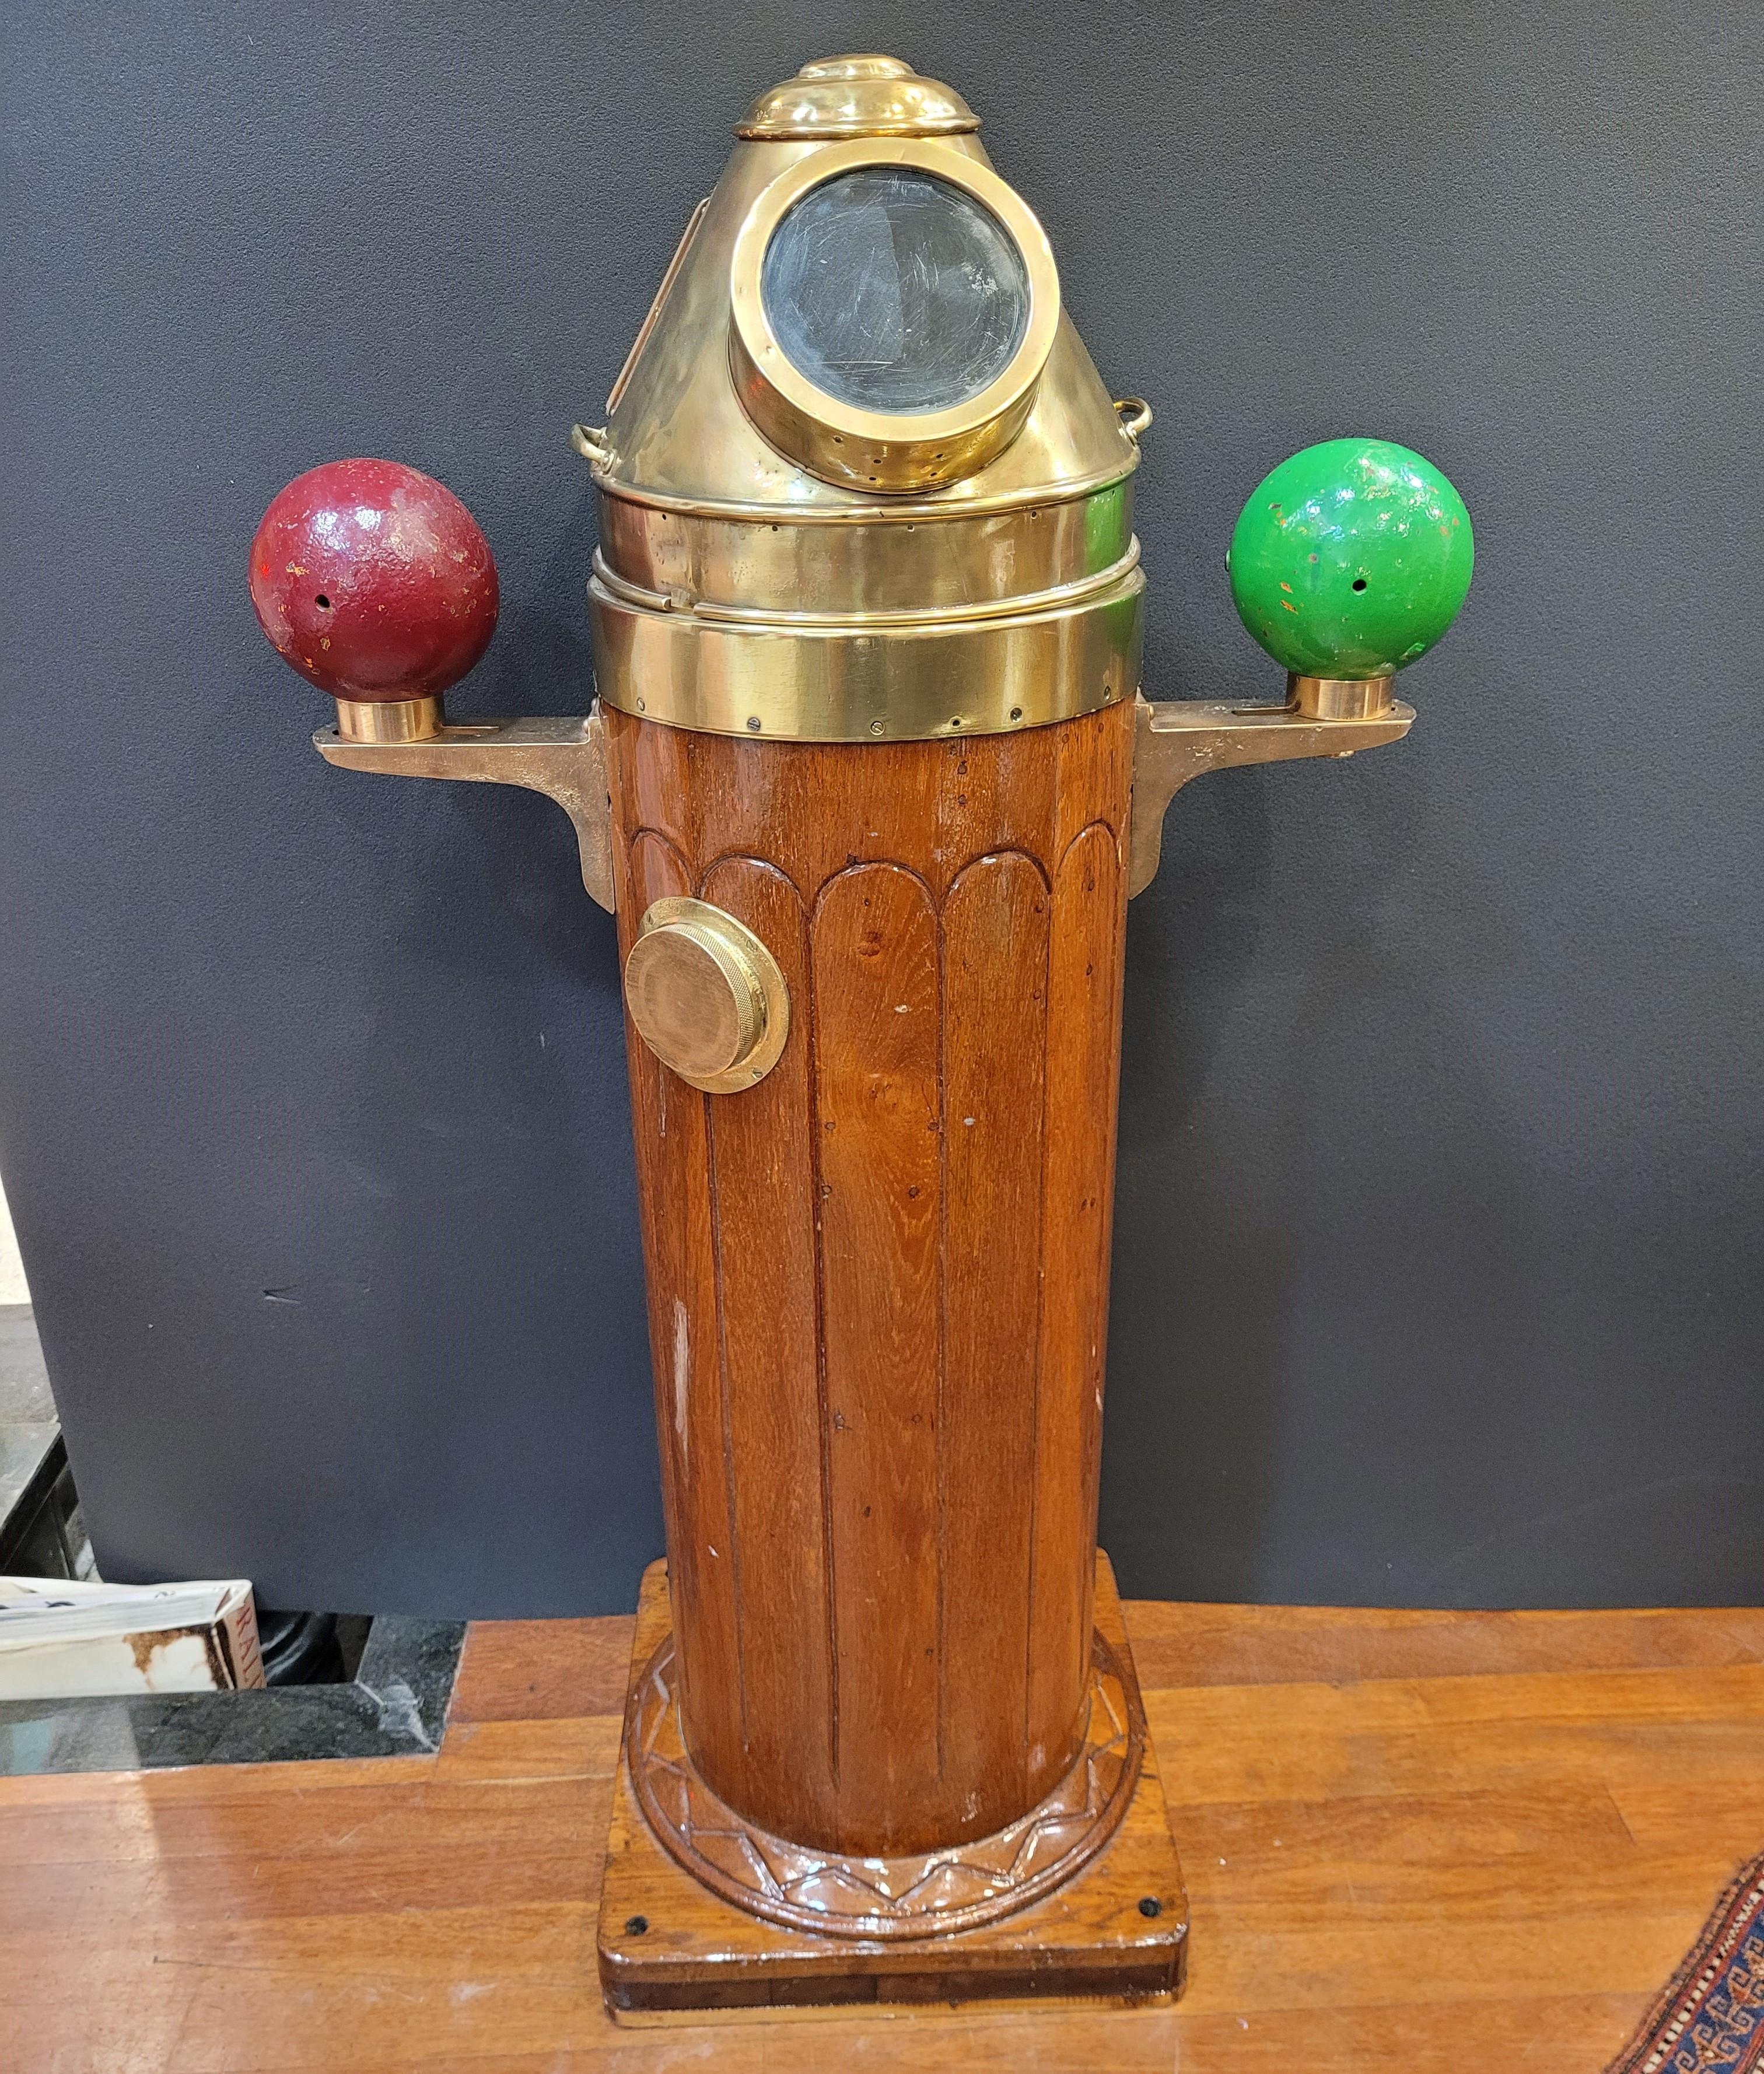 Outstanding and unique ship's navigation log, made during the Second World War, in teak wood and brass following the model created by Lionel Corp in 1943 for the US Navy. Inside it presents a magnetic compass or compass original from the late 19th